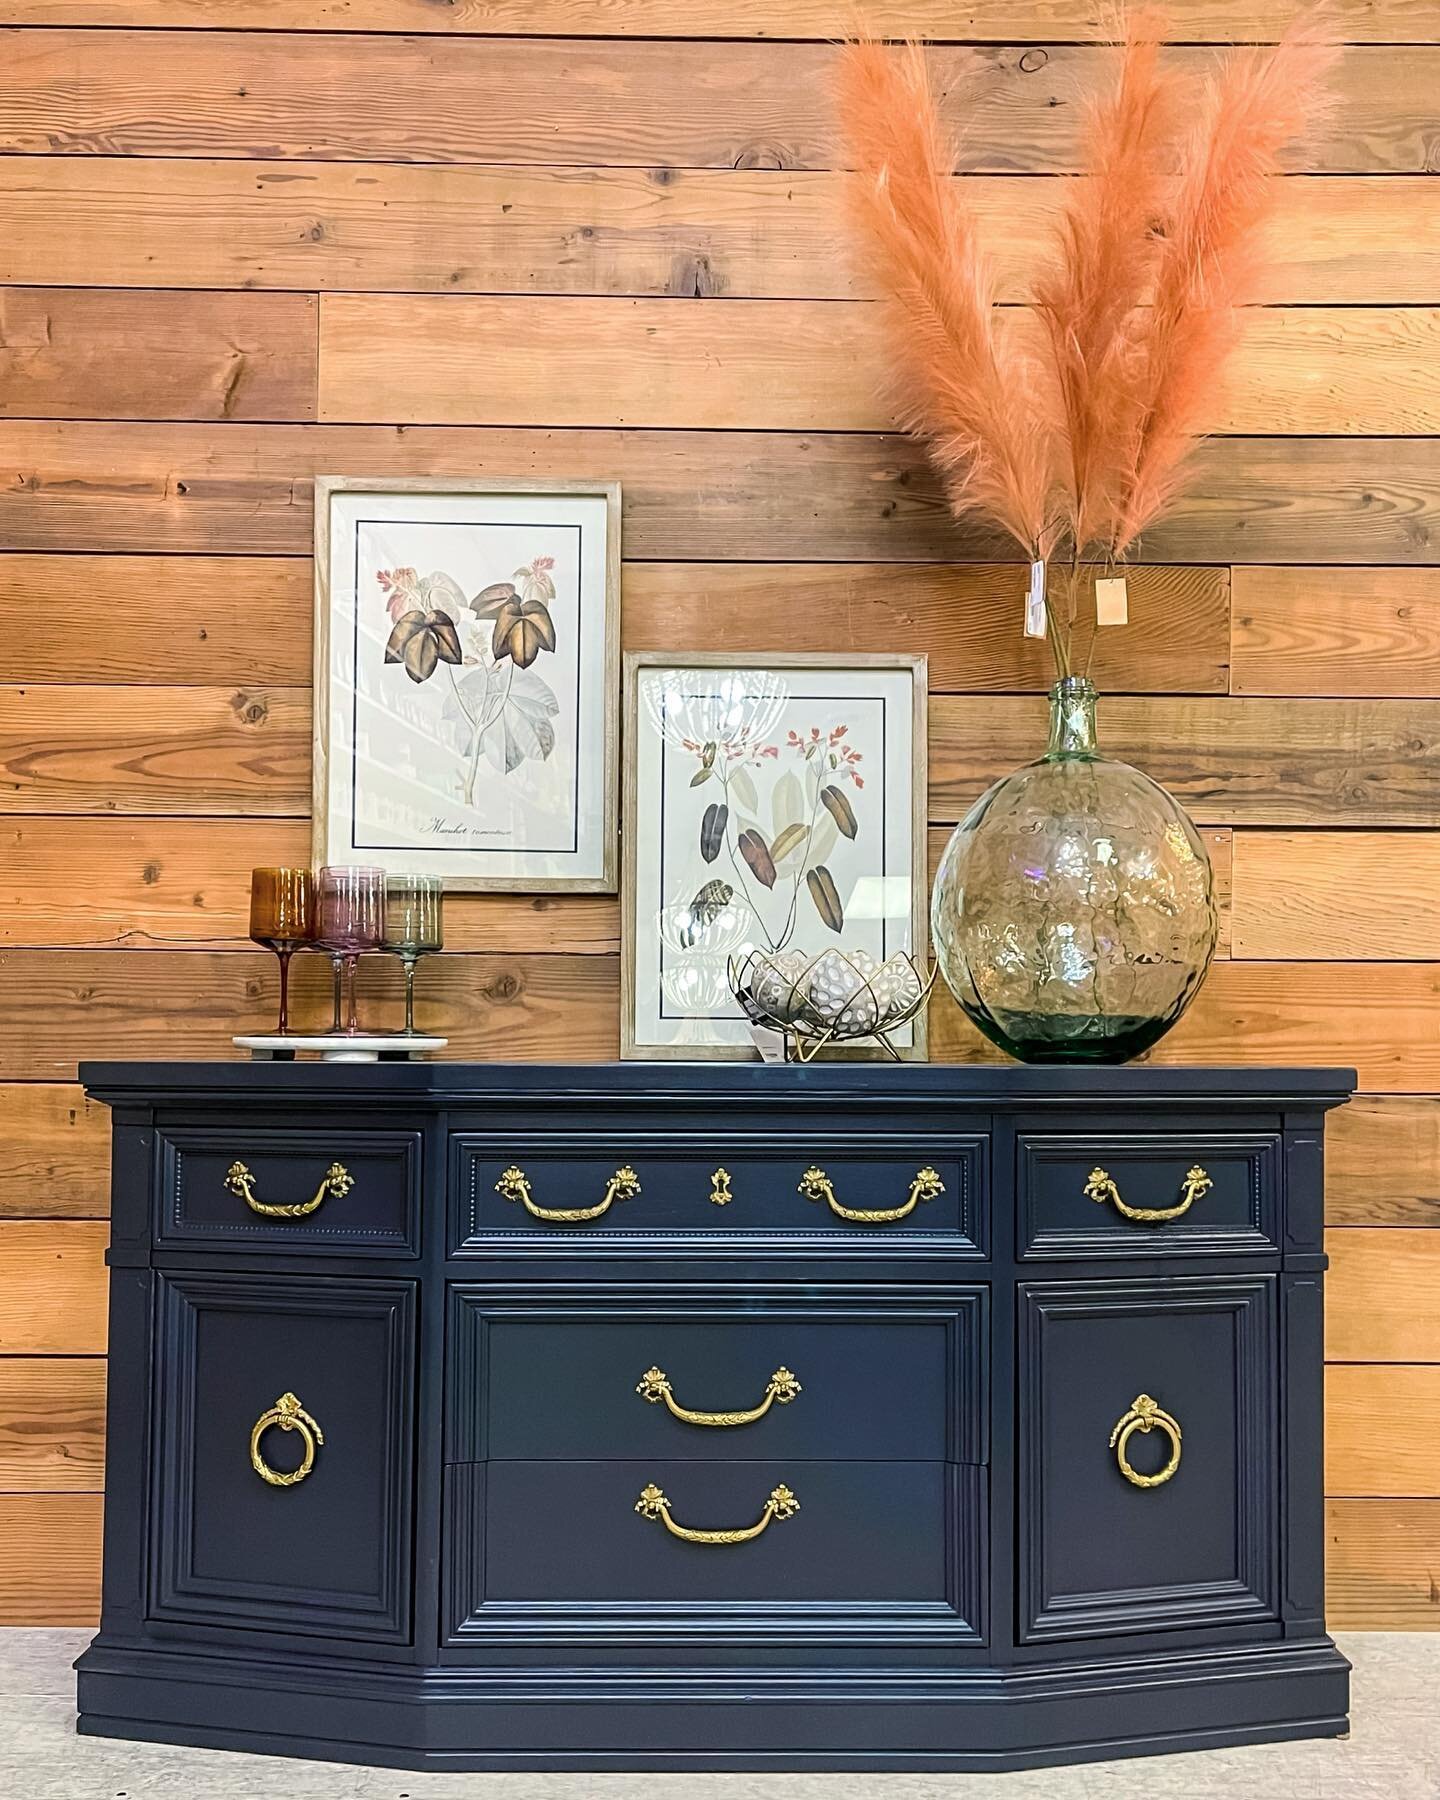 Looking for something shiny and new for your space? Look no further, we&rsquo;ve got just what you didn&rsquo;t know you needed😉 Whether you&rsquo;re looking for a petite buffet, a cute entryway piece, or something unique to replace your TV stand, t